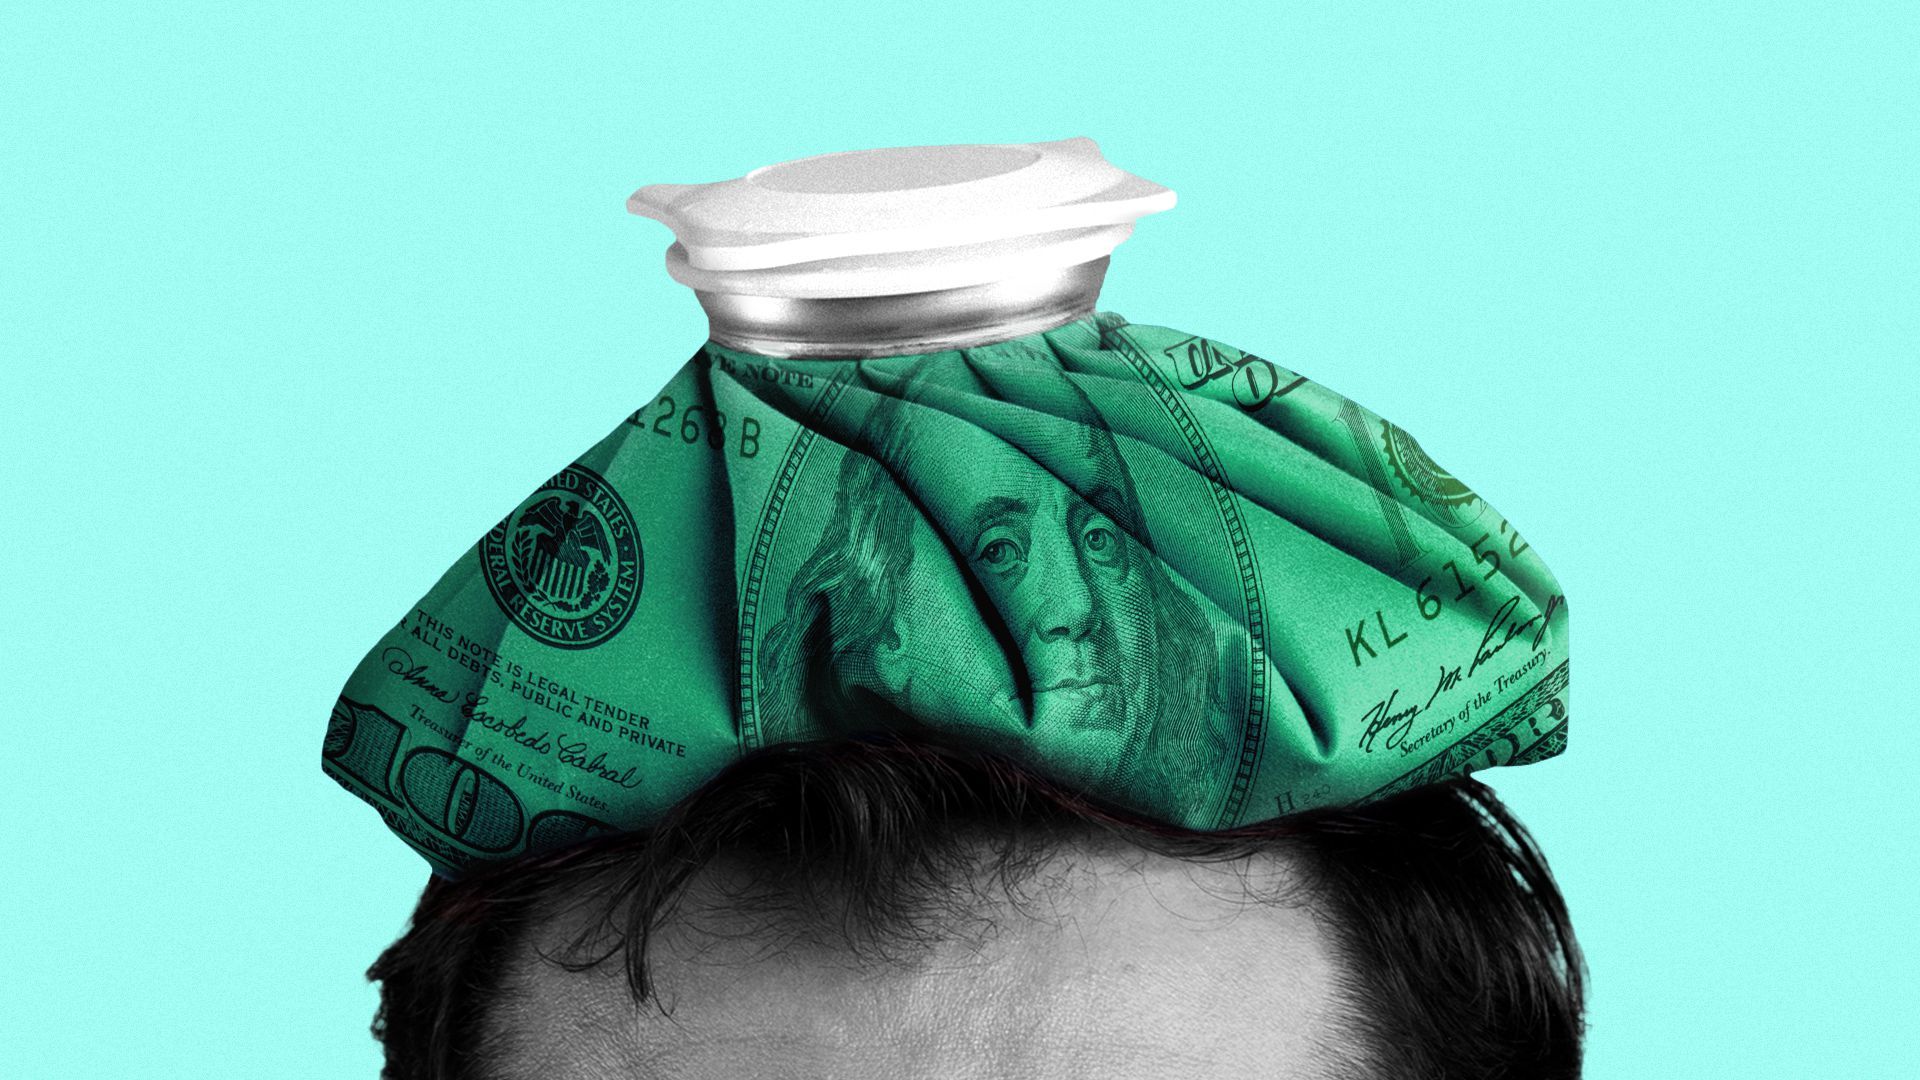 An ice pack made from a $100 bill on top of a person's head.